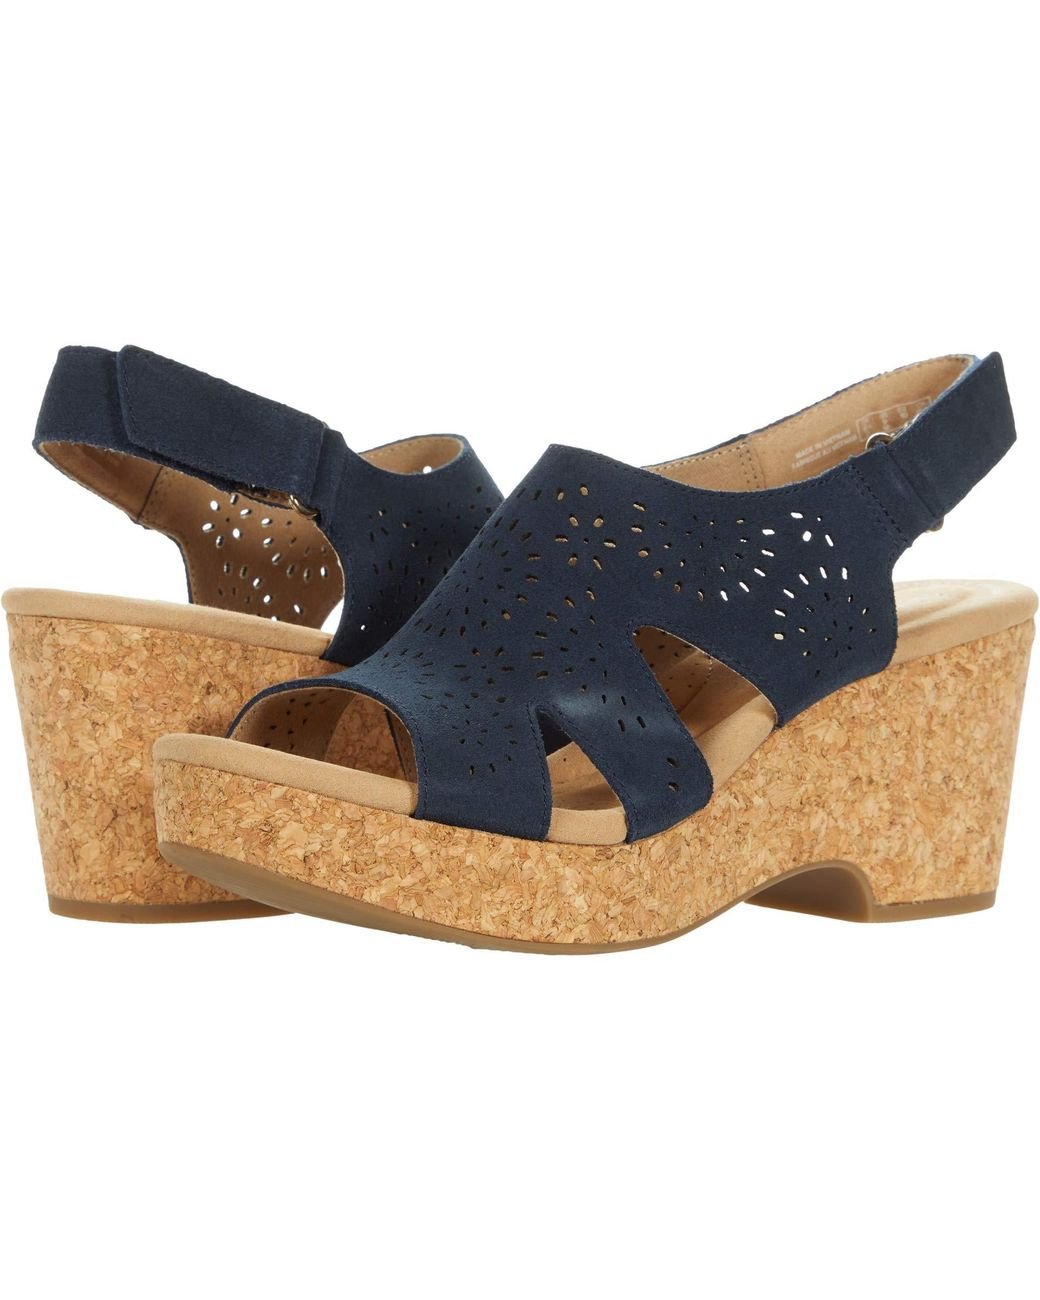 Clarks Leather Giselle Bay in Navy Suede (Blue) - Save 40% - Lyst